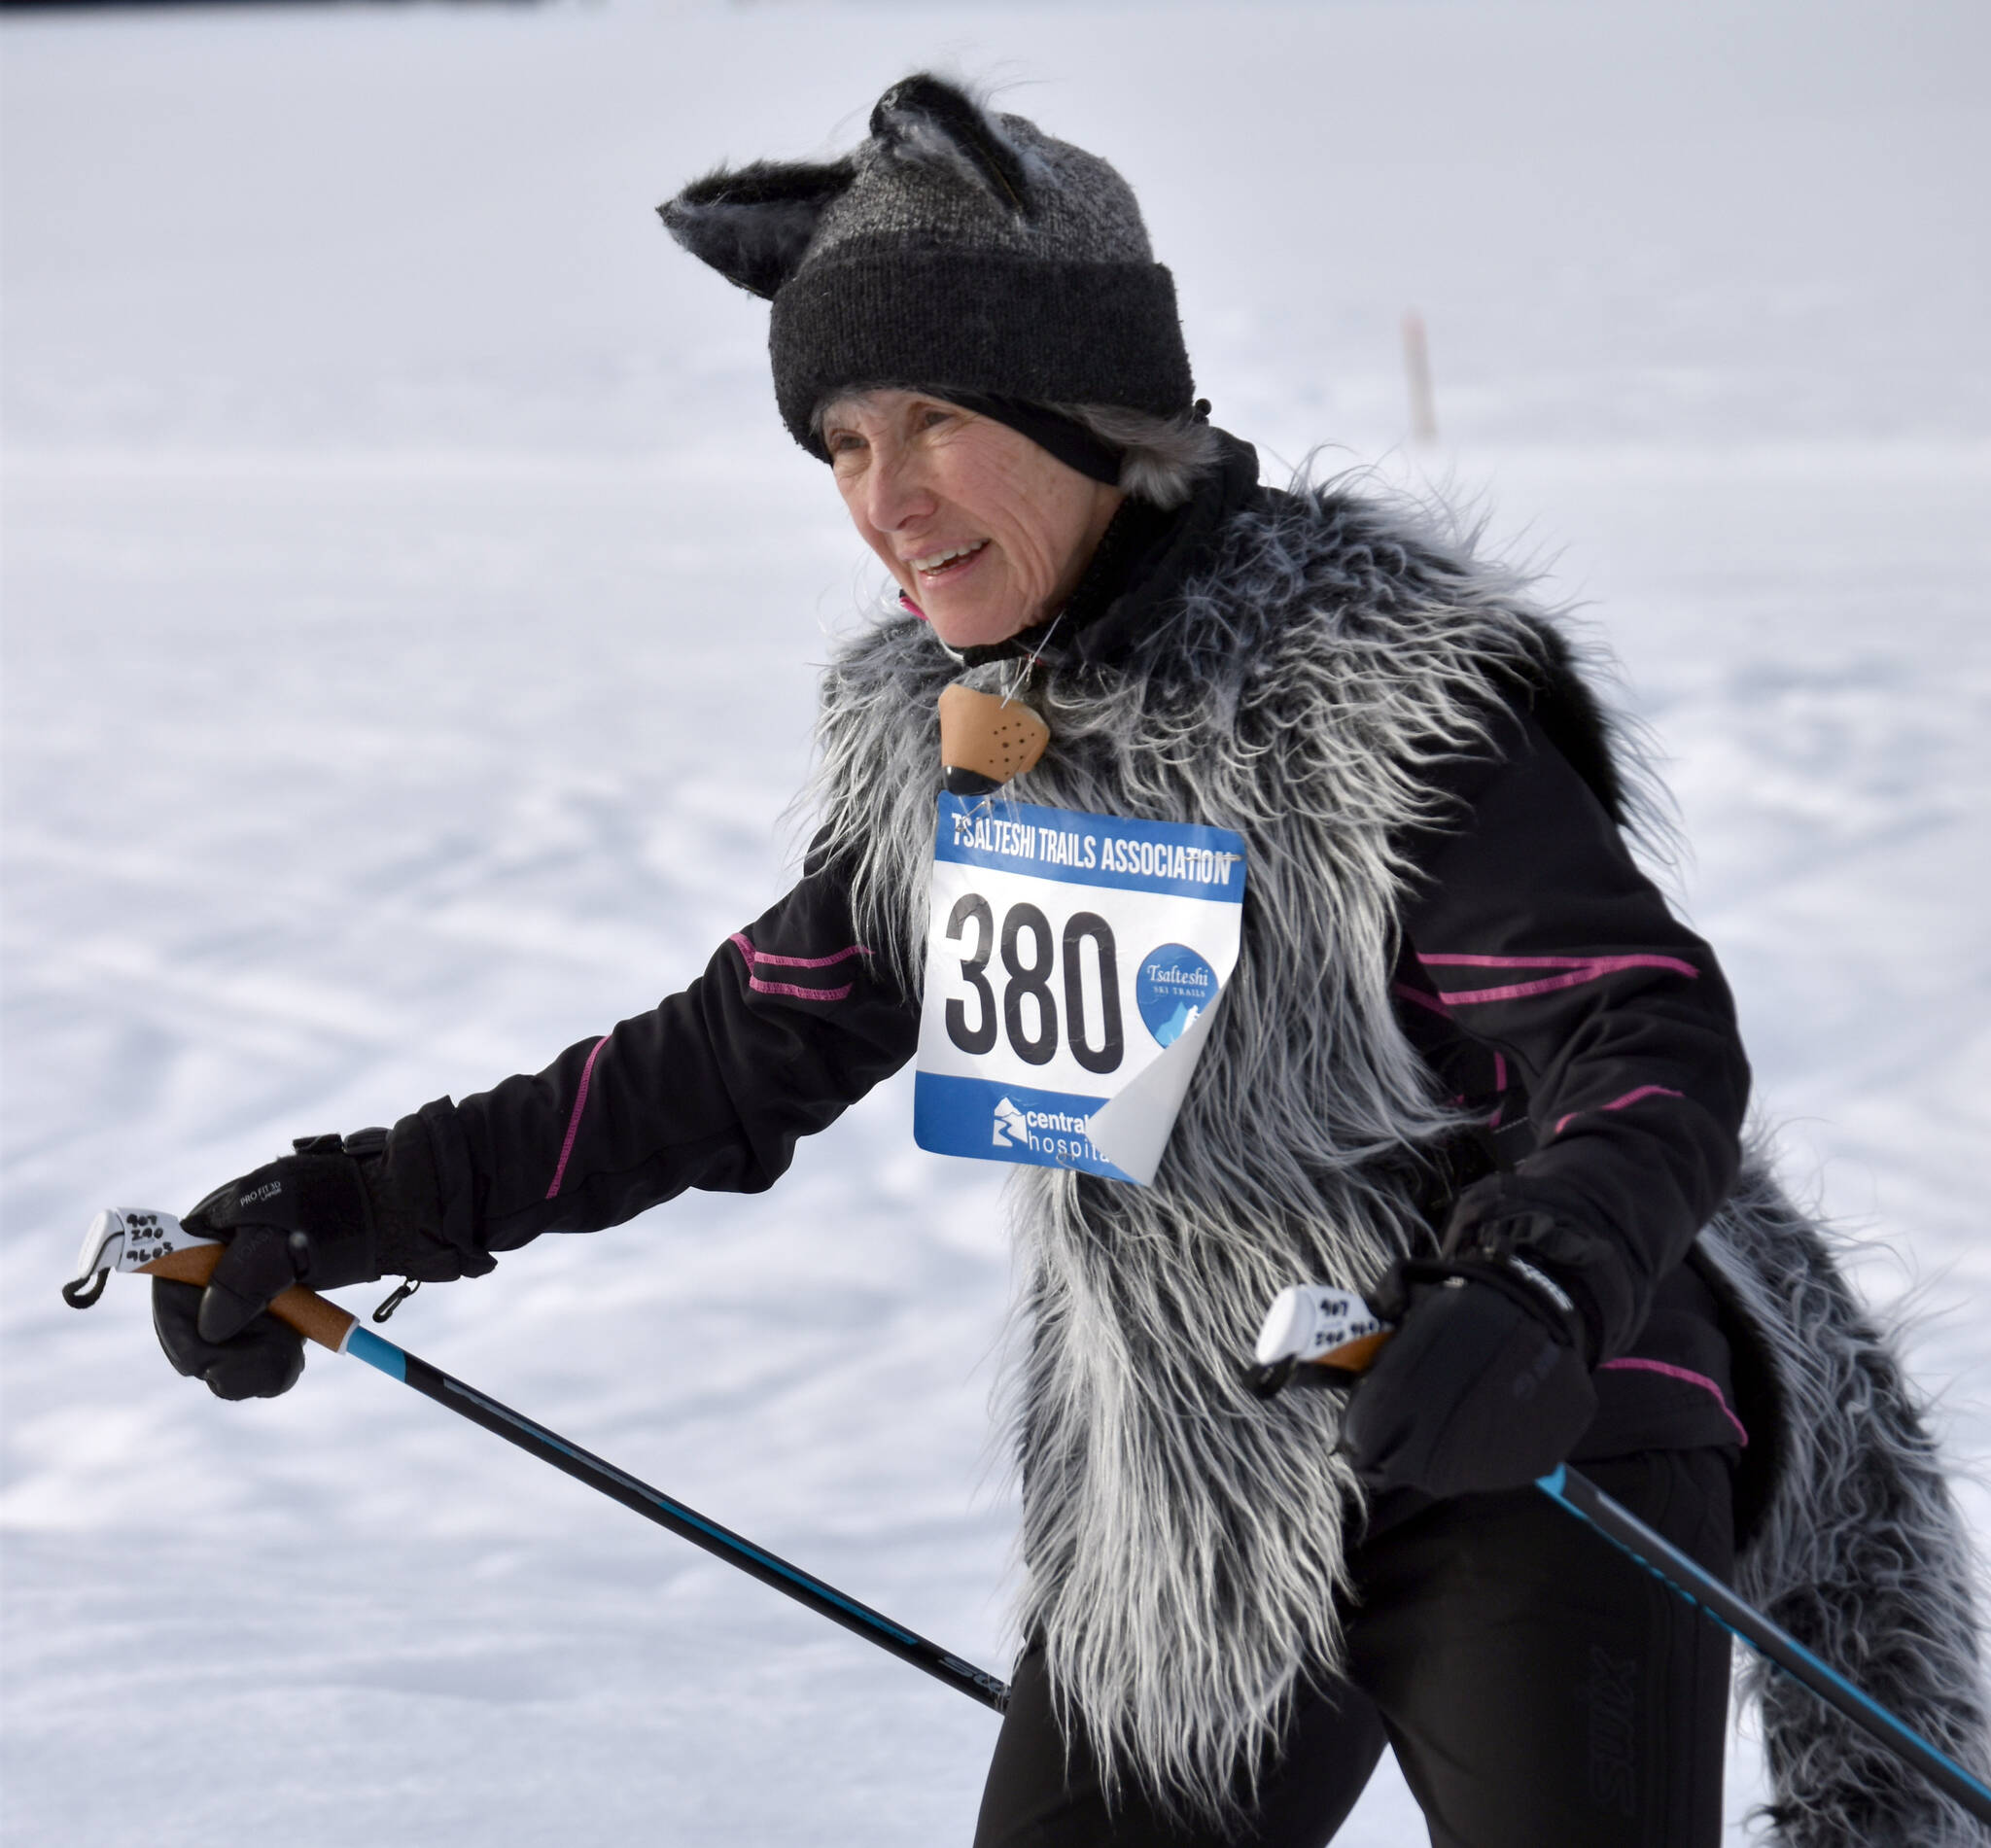 Sara Mahood, dressed as the Wolf, skis at the 19th annual Ski For Women on Sunday, Feb. 12, 2023, at Tsalteshi Trails just outside of Soldotna, Alaska. Mahood was part of the winning costume of “Little Red Riding Hood and the Big Bad Wolf.” Not pictured, Leslie Boyd was Little Red Riding Hood, Sue Seggerman was the Woodcutter and Gigi Banas was Grandma. (Photo by Jeff Helminiak/Peninsula Clarion)